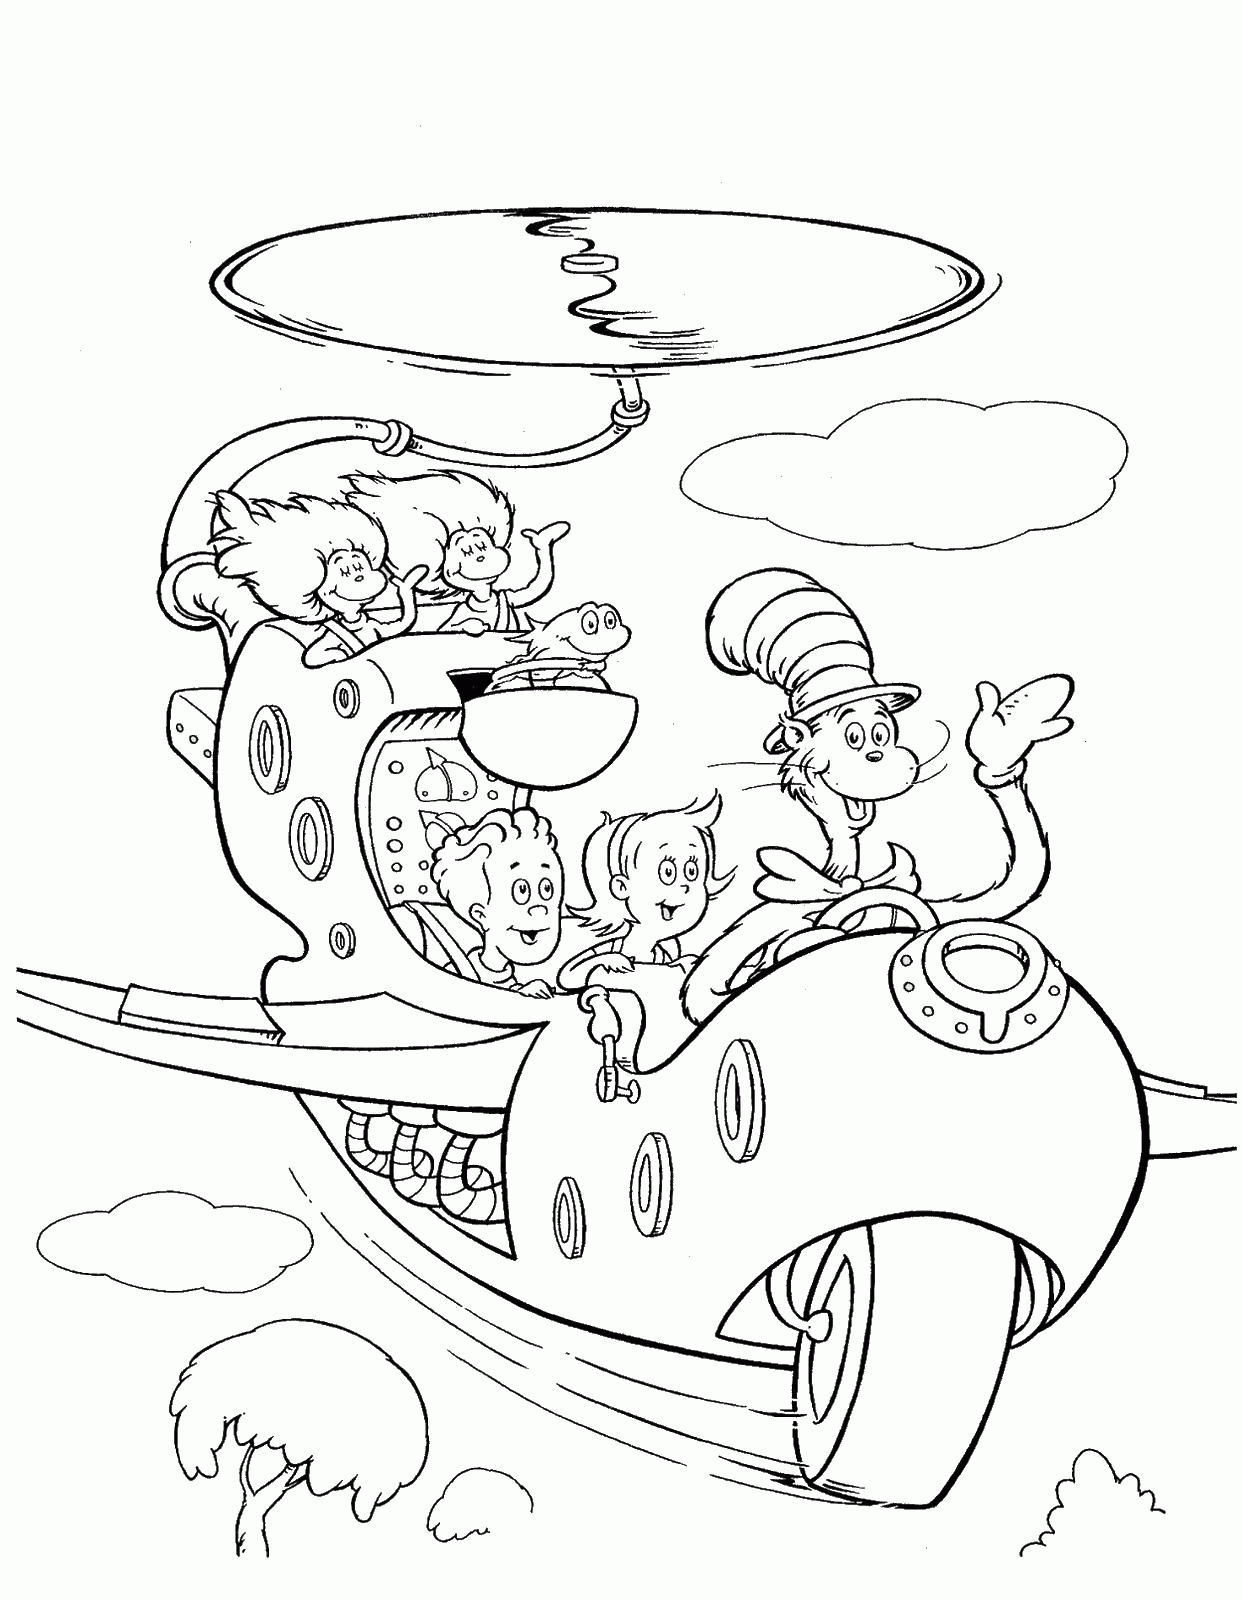 Cool Cat In The Hat 12 Coloring Page